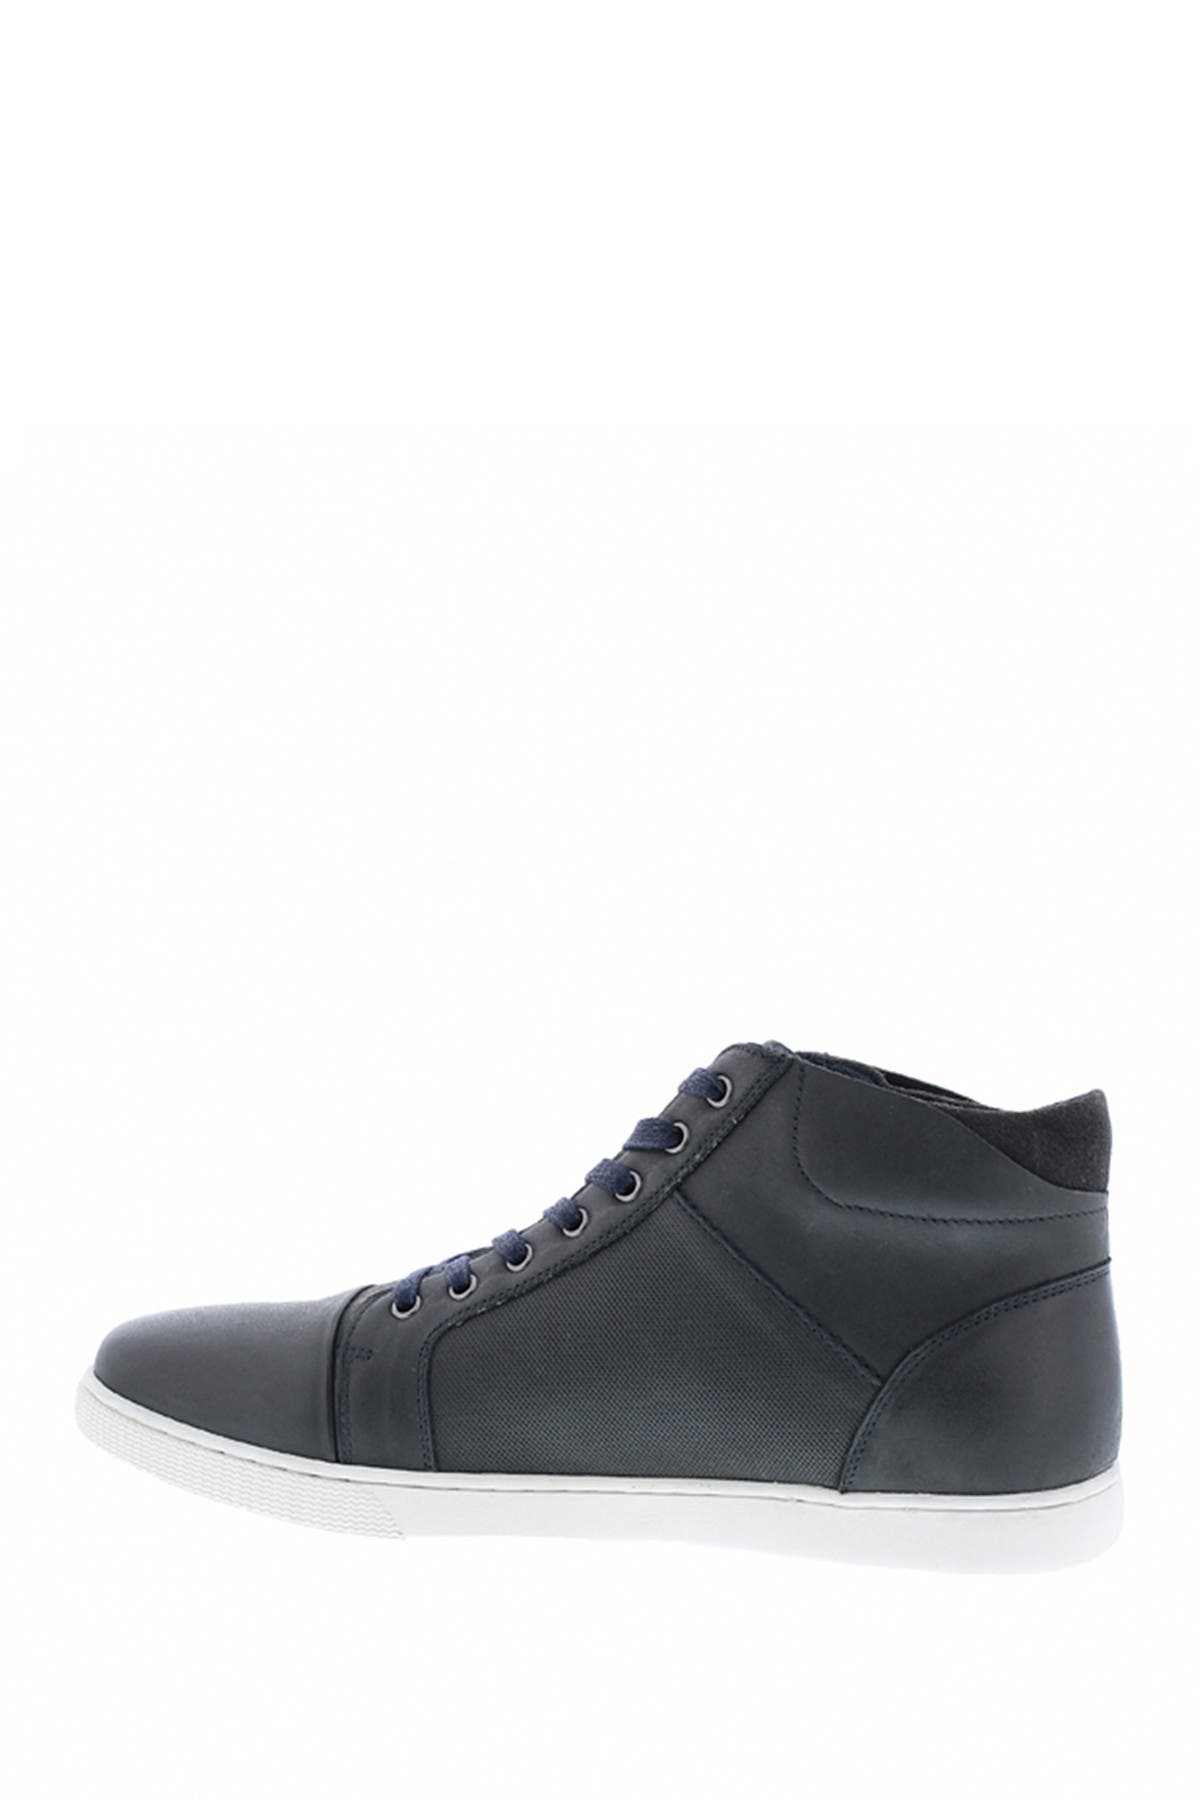 English Laundry Vail Sneaker In Navy